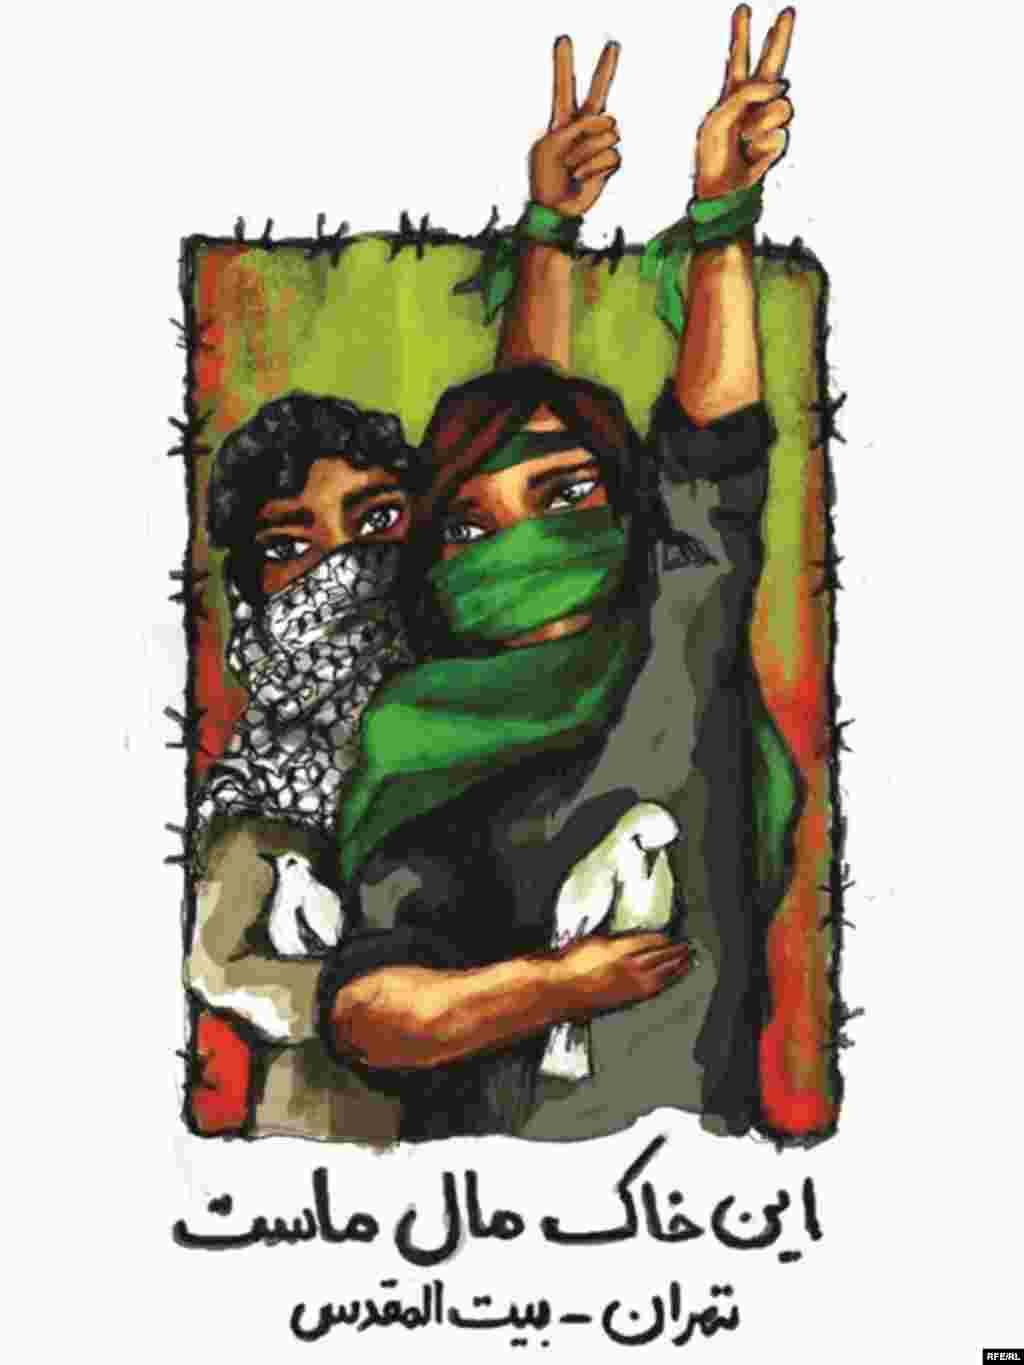 Iran's Election Unrest: An Artist's View #5